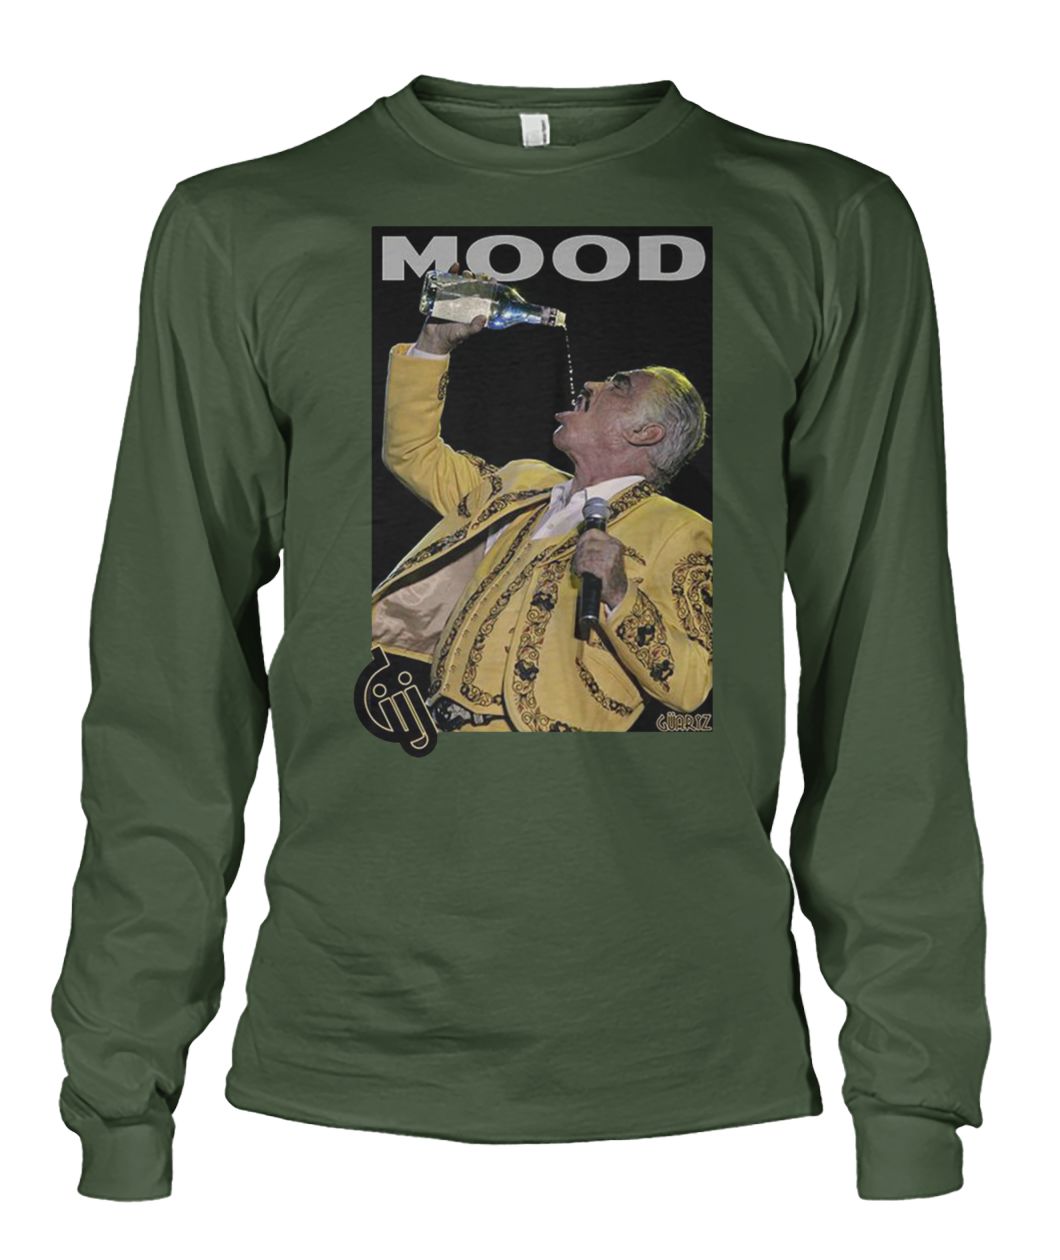 Vicente fernández drinking and singing mood unisex long sleeve